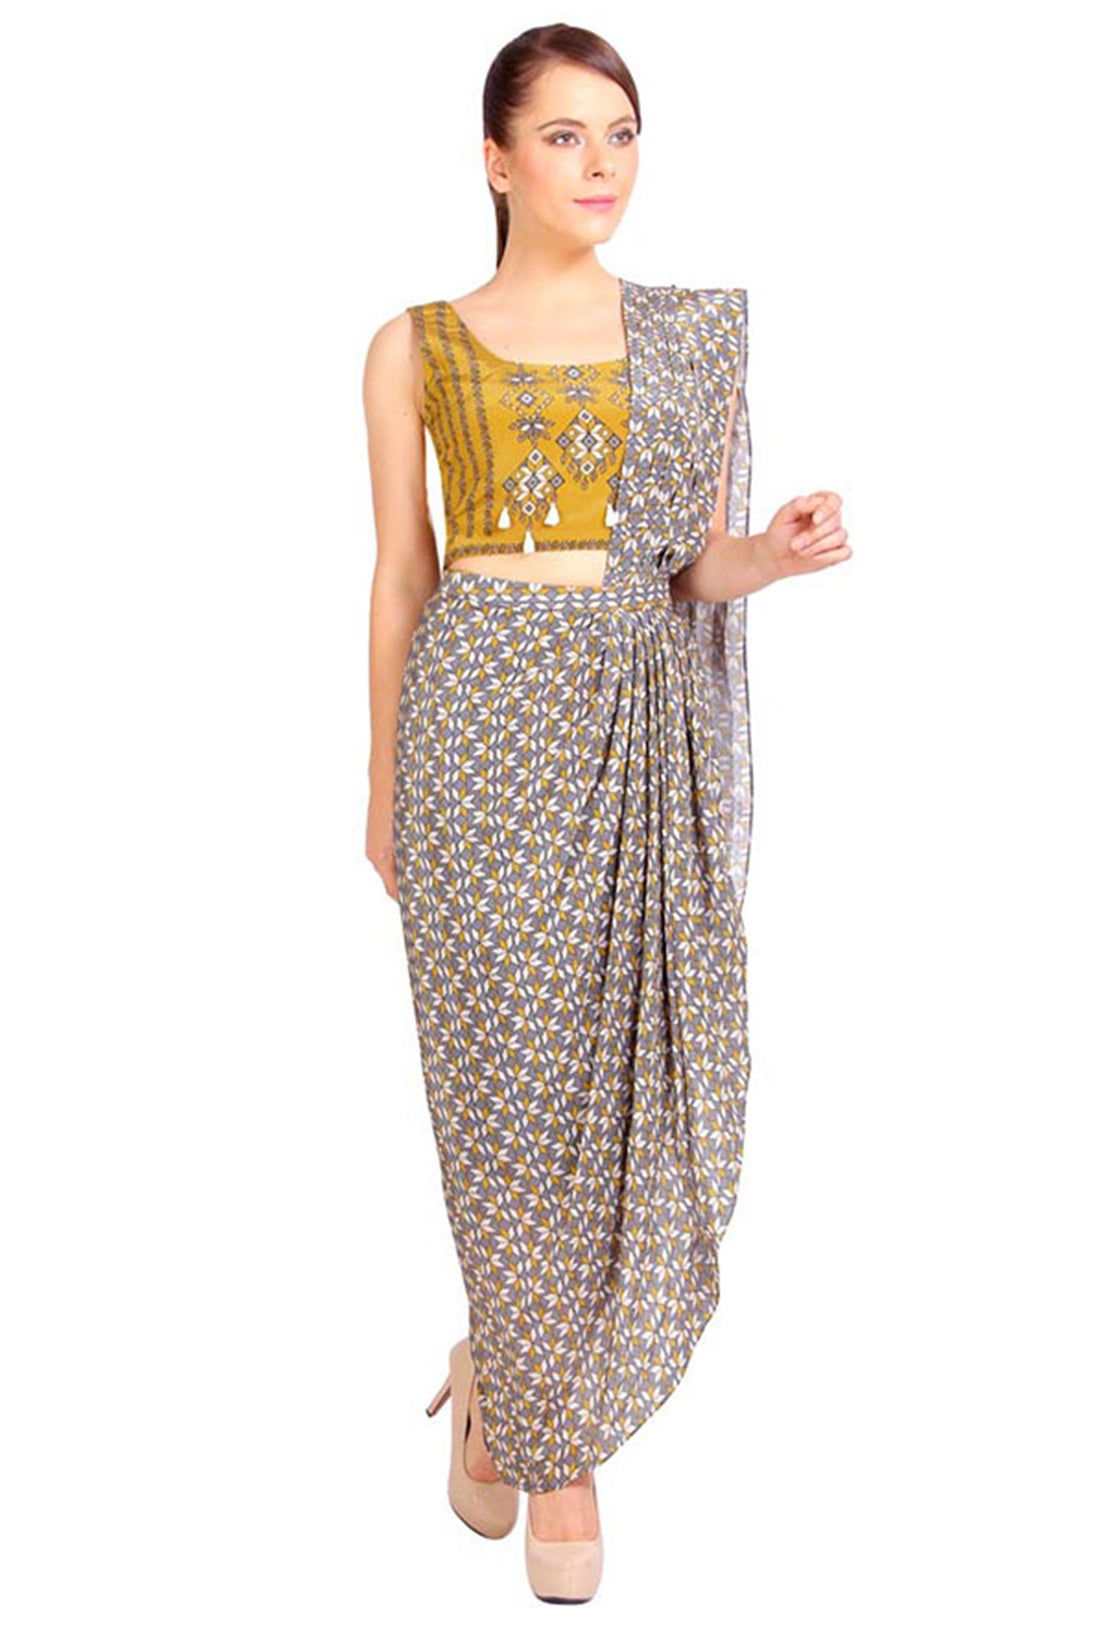 Bullion Flower Printed Pre-Stitched Saree With Top